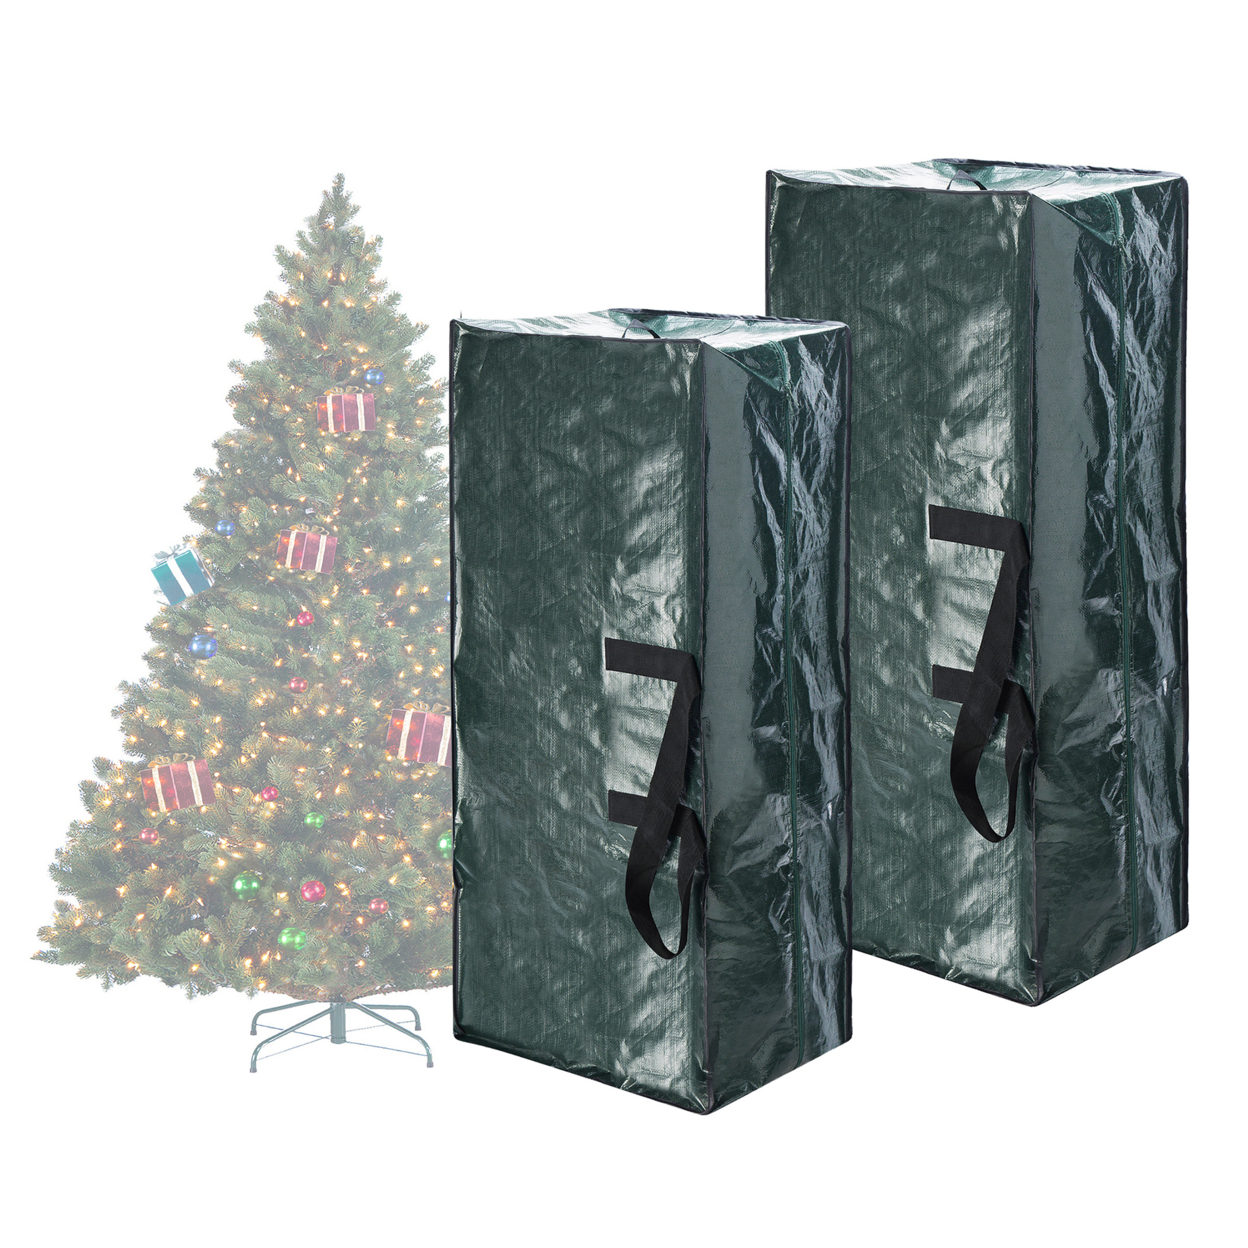 Elf Stor Green Christmas Tree Bag Holiday Set For Two 9 Foot Trees Or One Larger